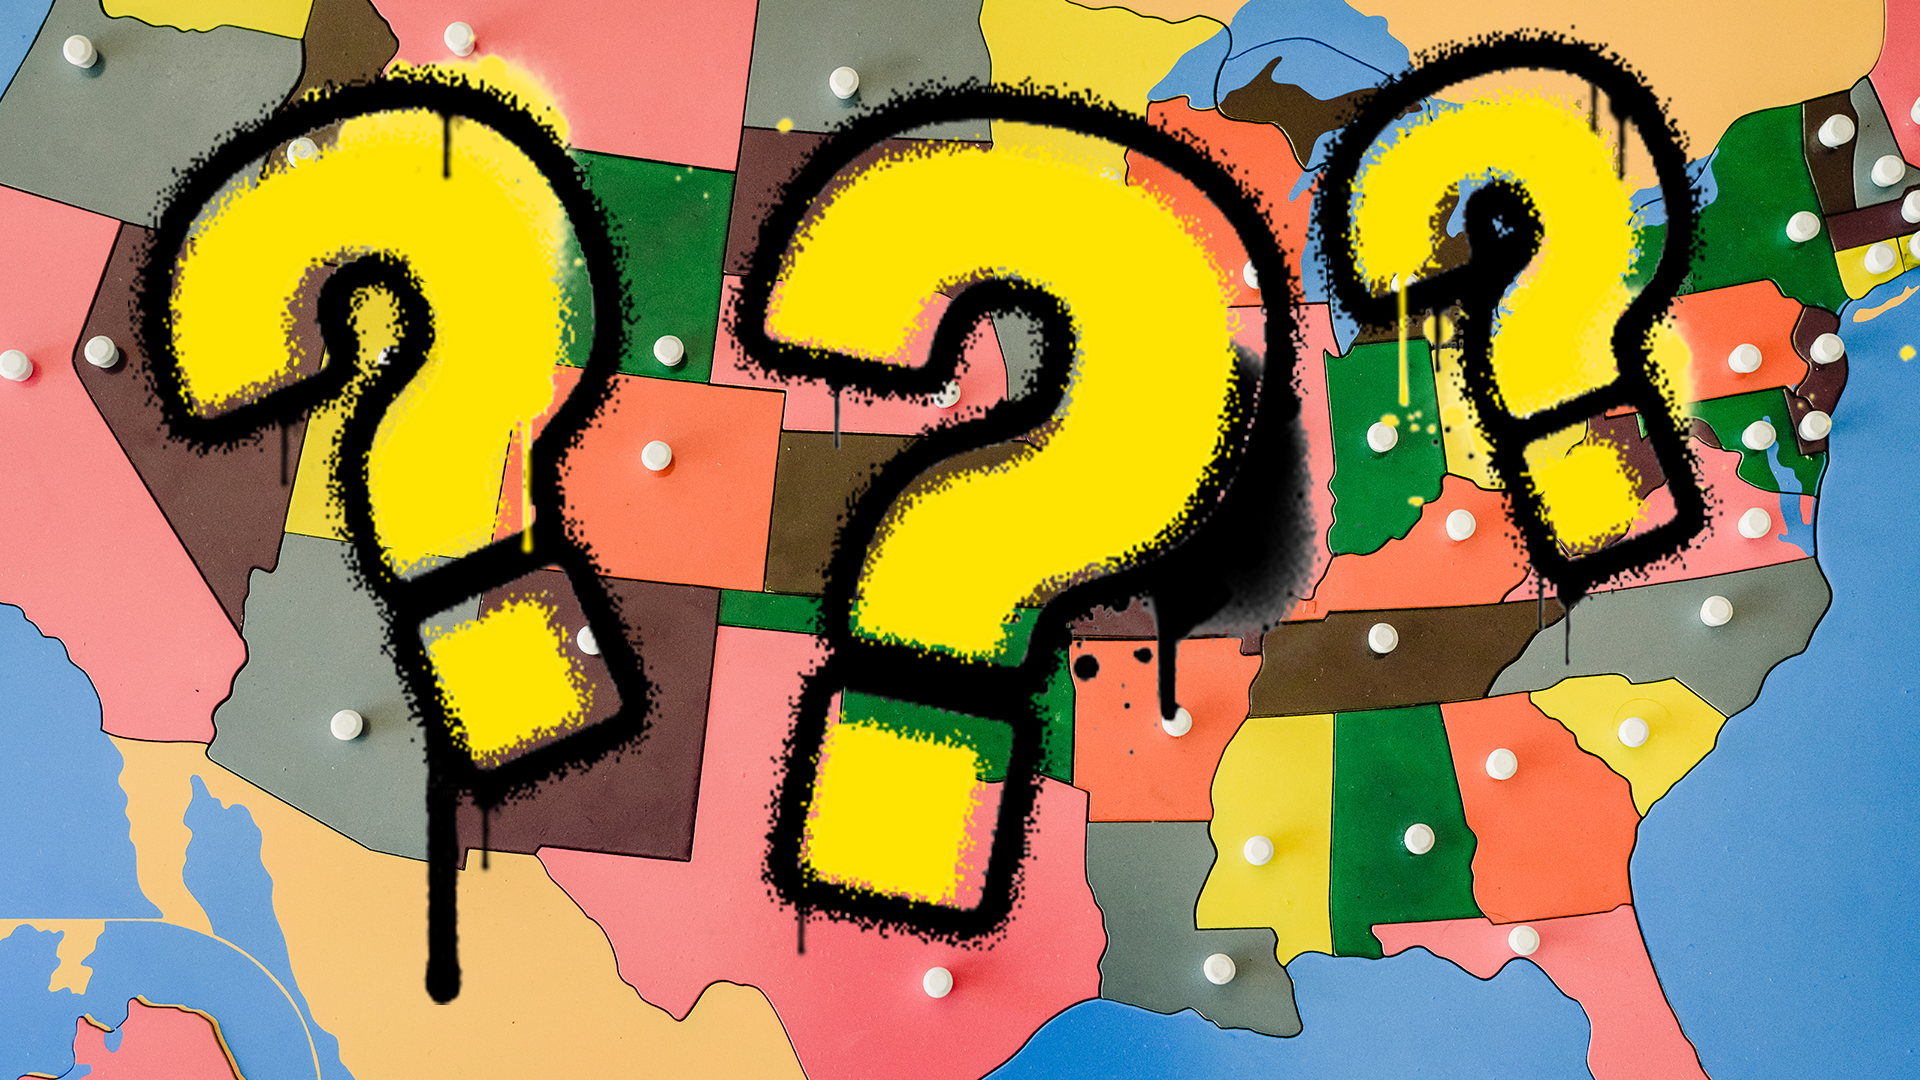 Map of the States with question marks